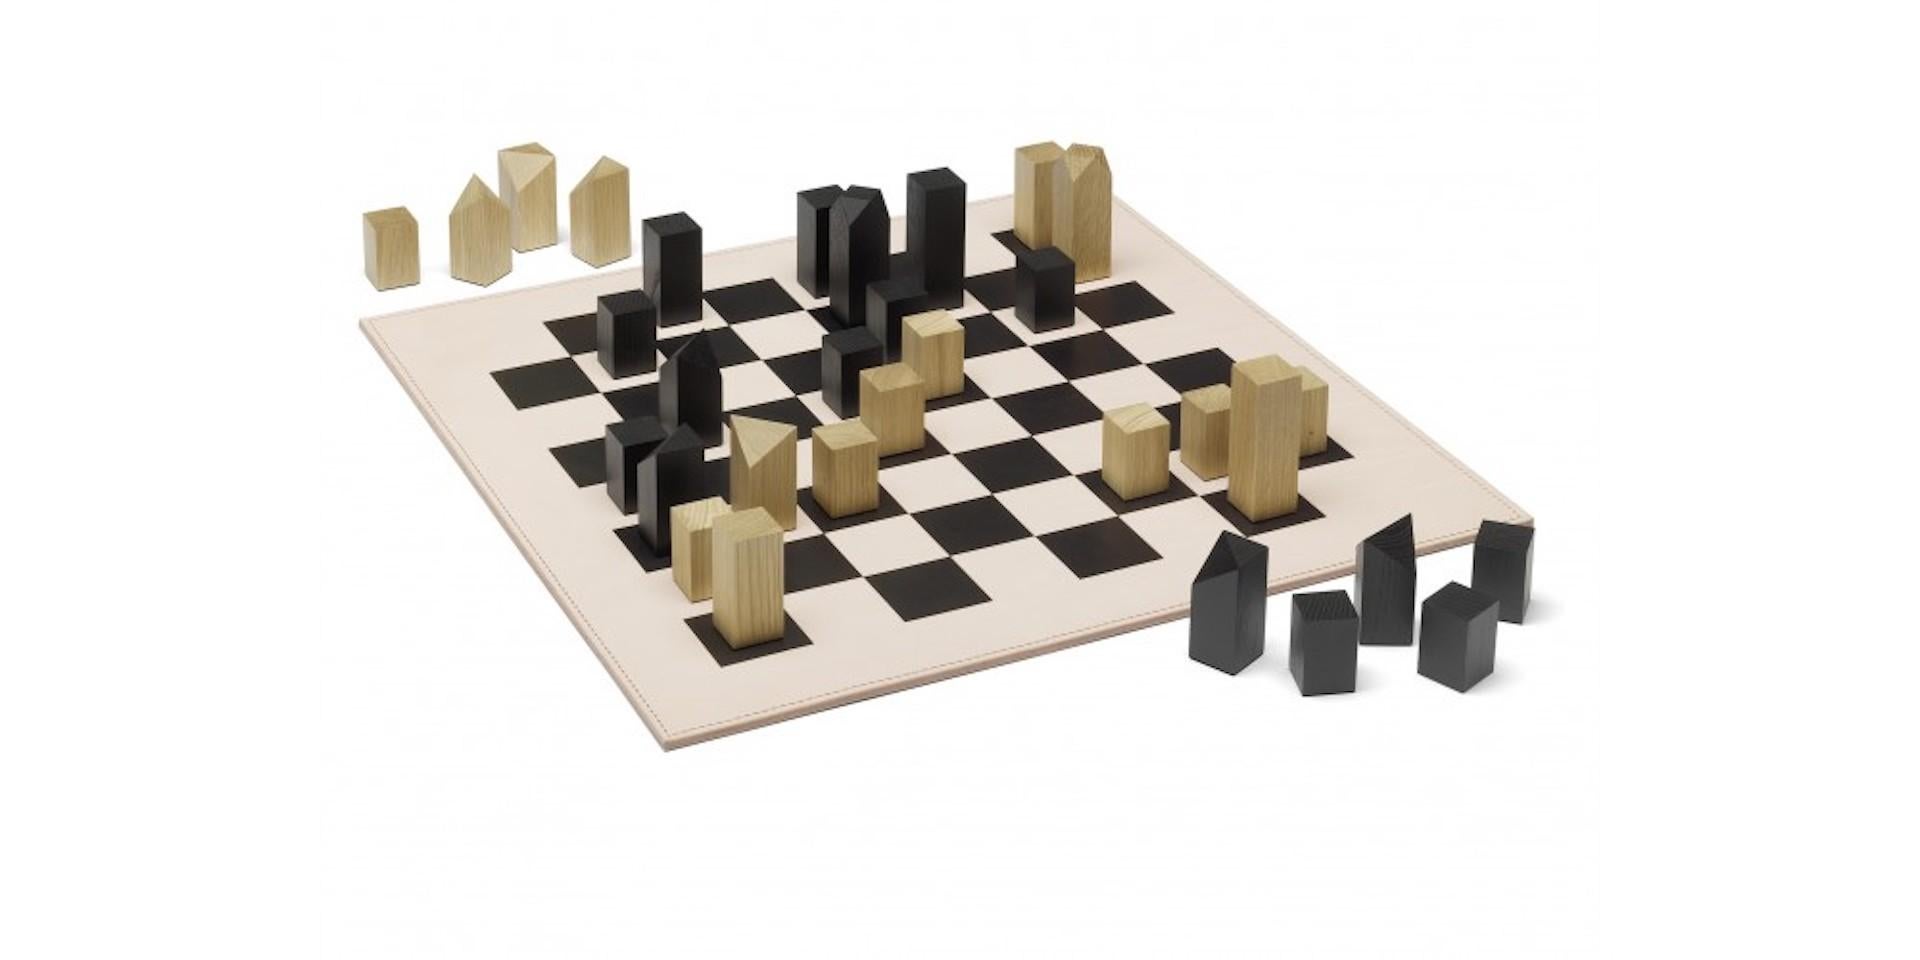 E15 Nona Chessboard & Chess Figures by Annabelle Klute  For Sale 3